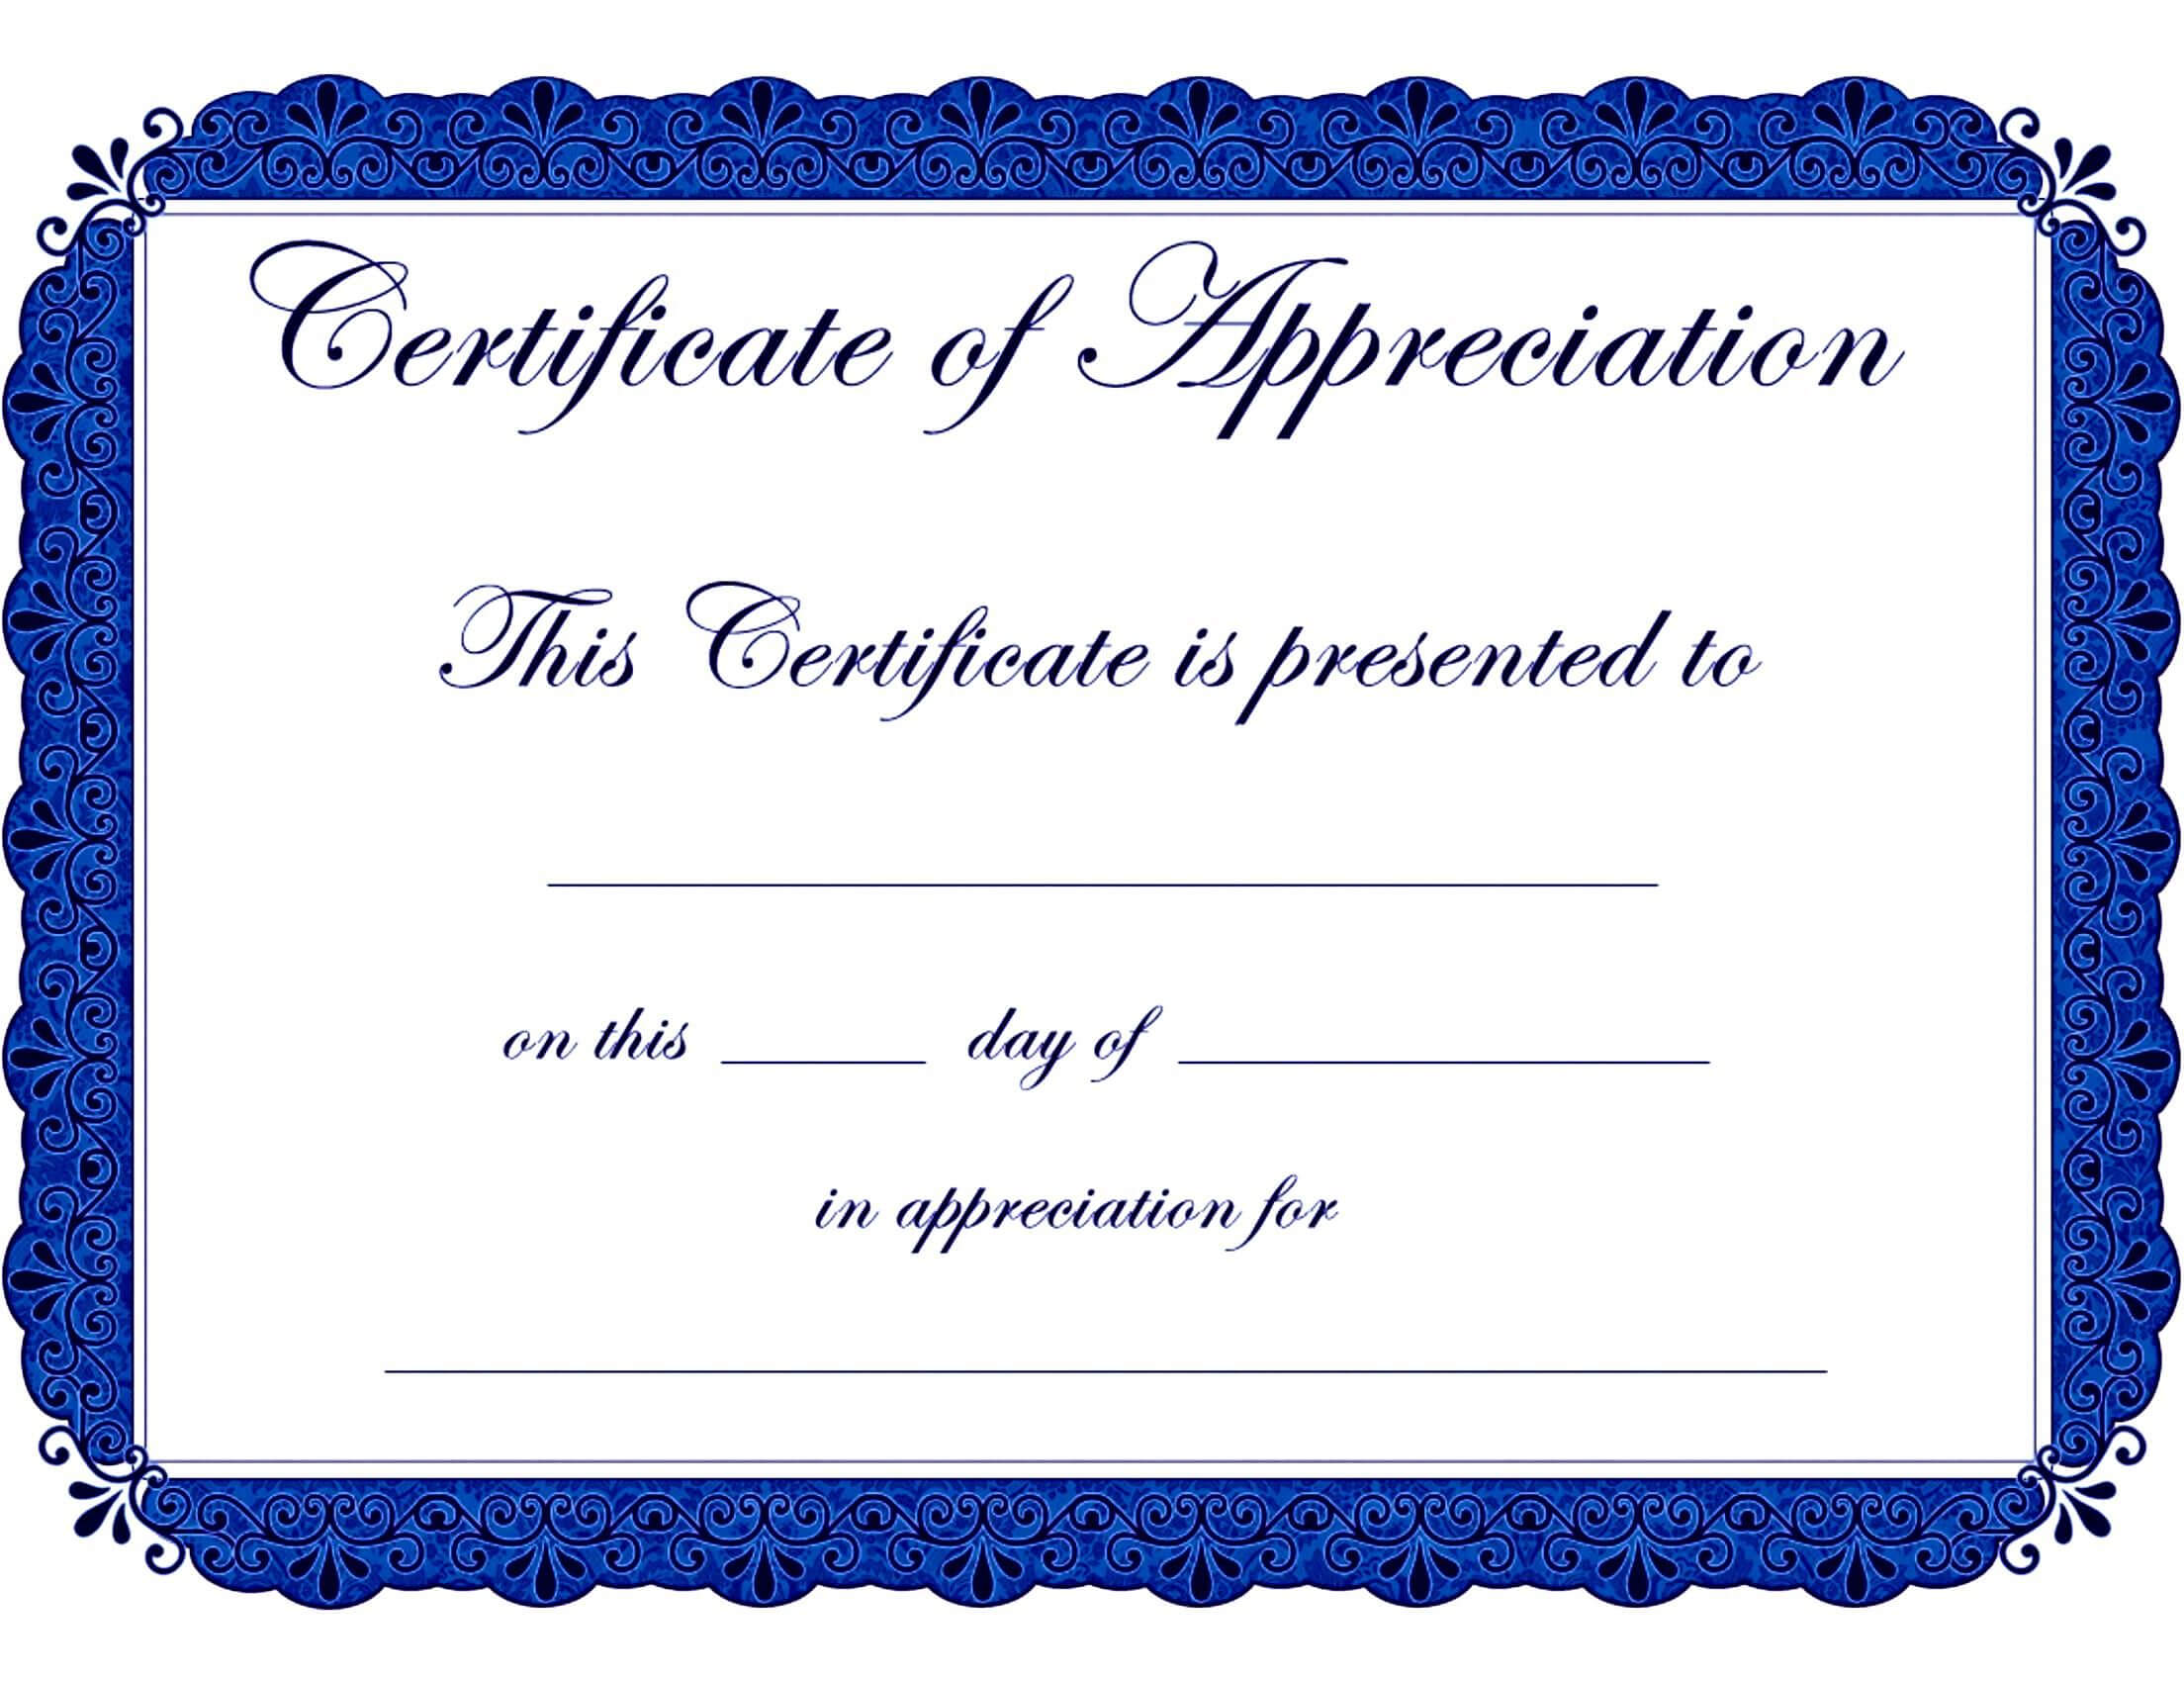 Award Template Word Ceremony Invitation Free Scholarship With Free Art Certificate Templates